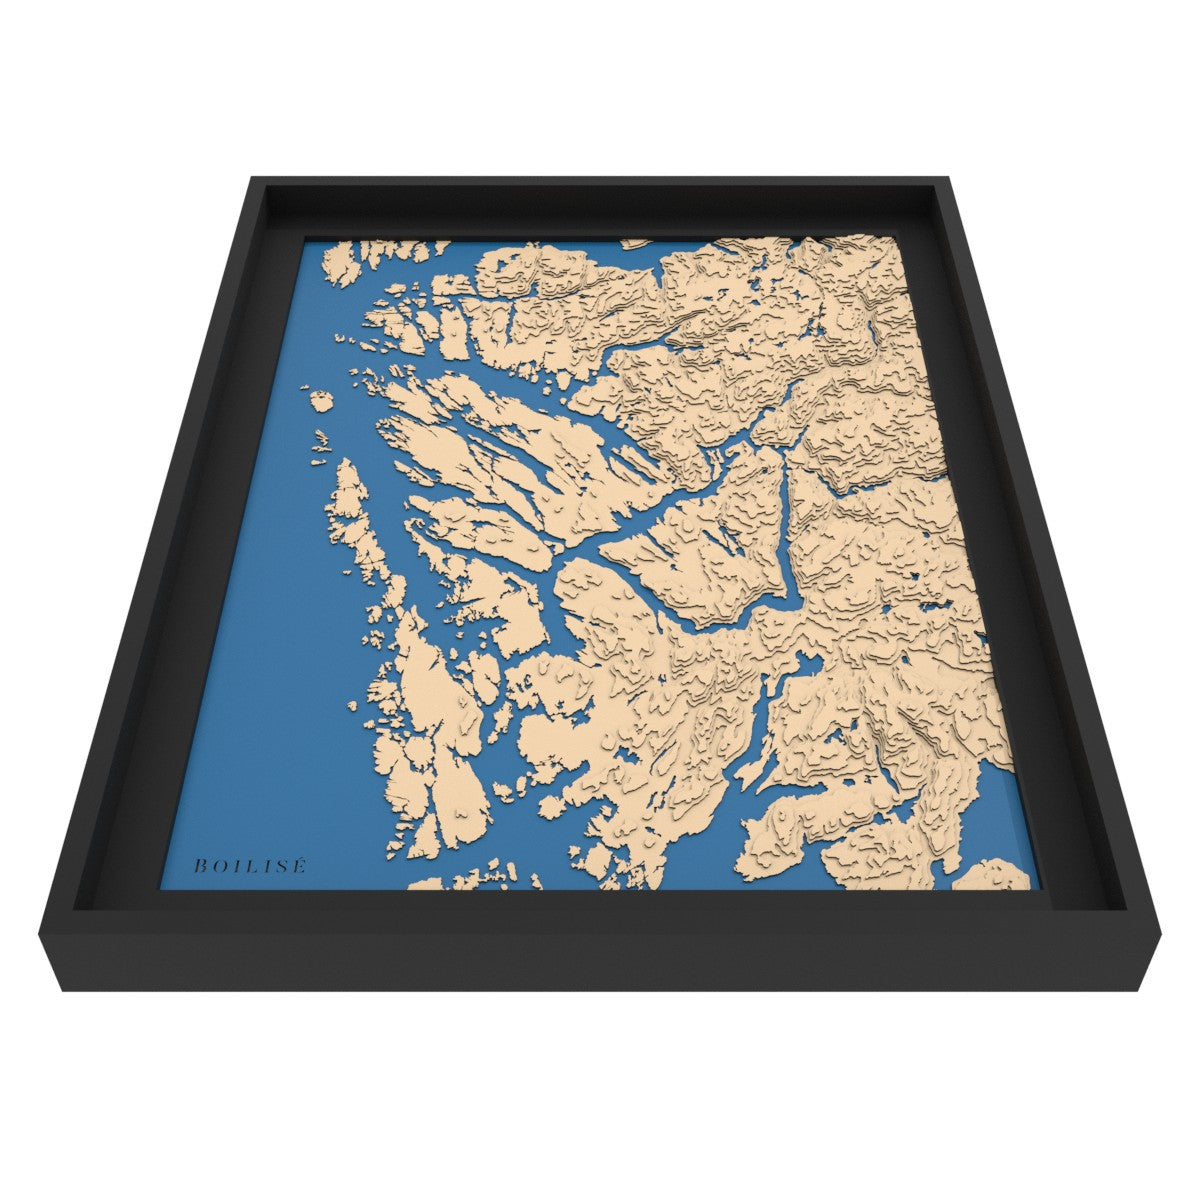 Map of Bergen in the heart of the fjords